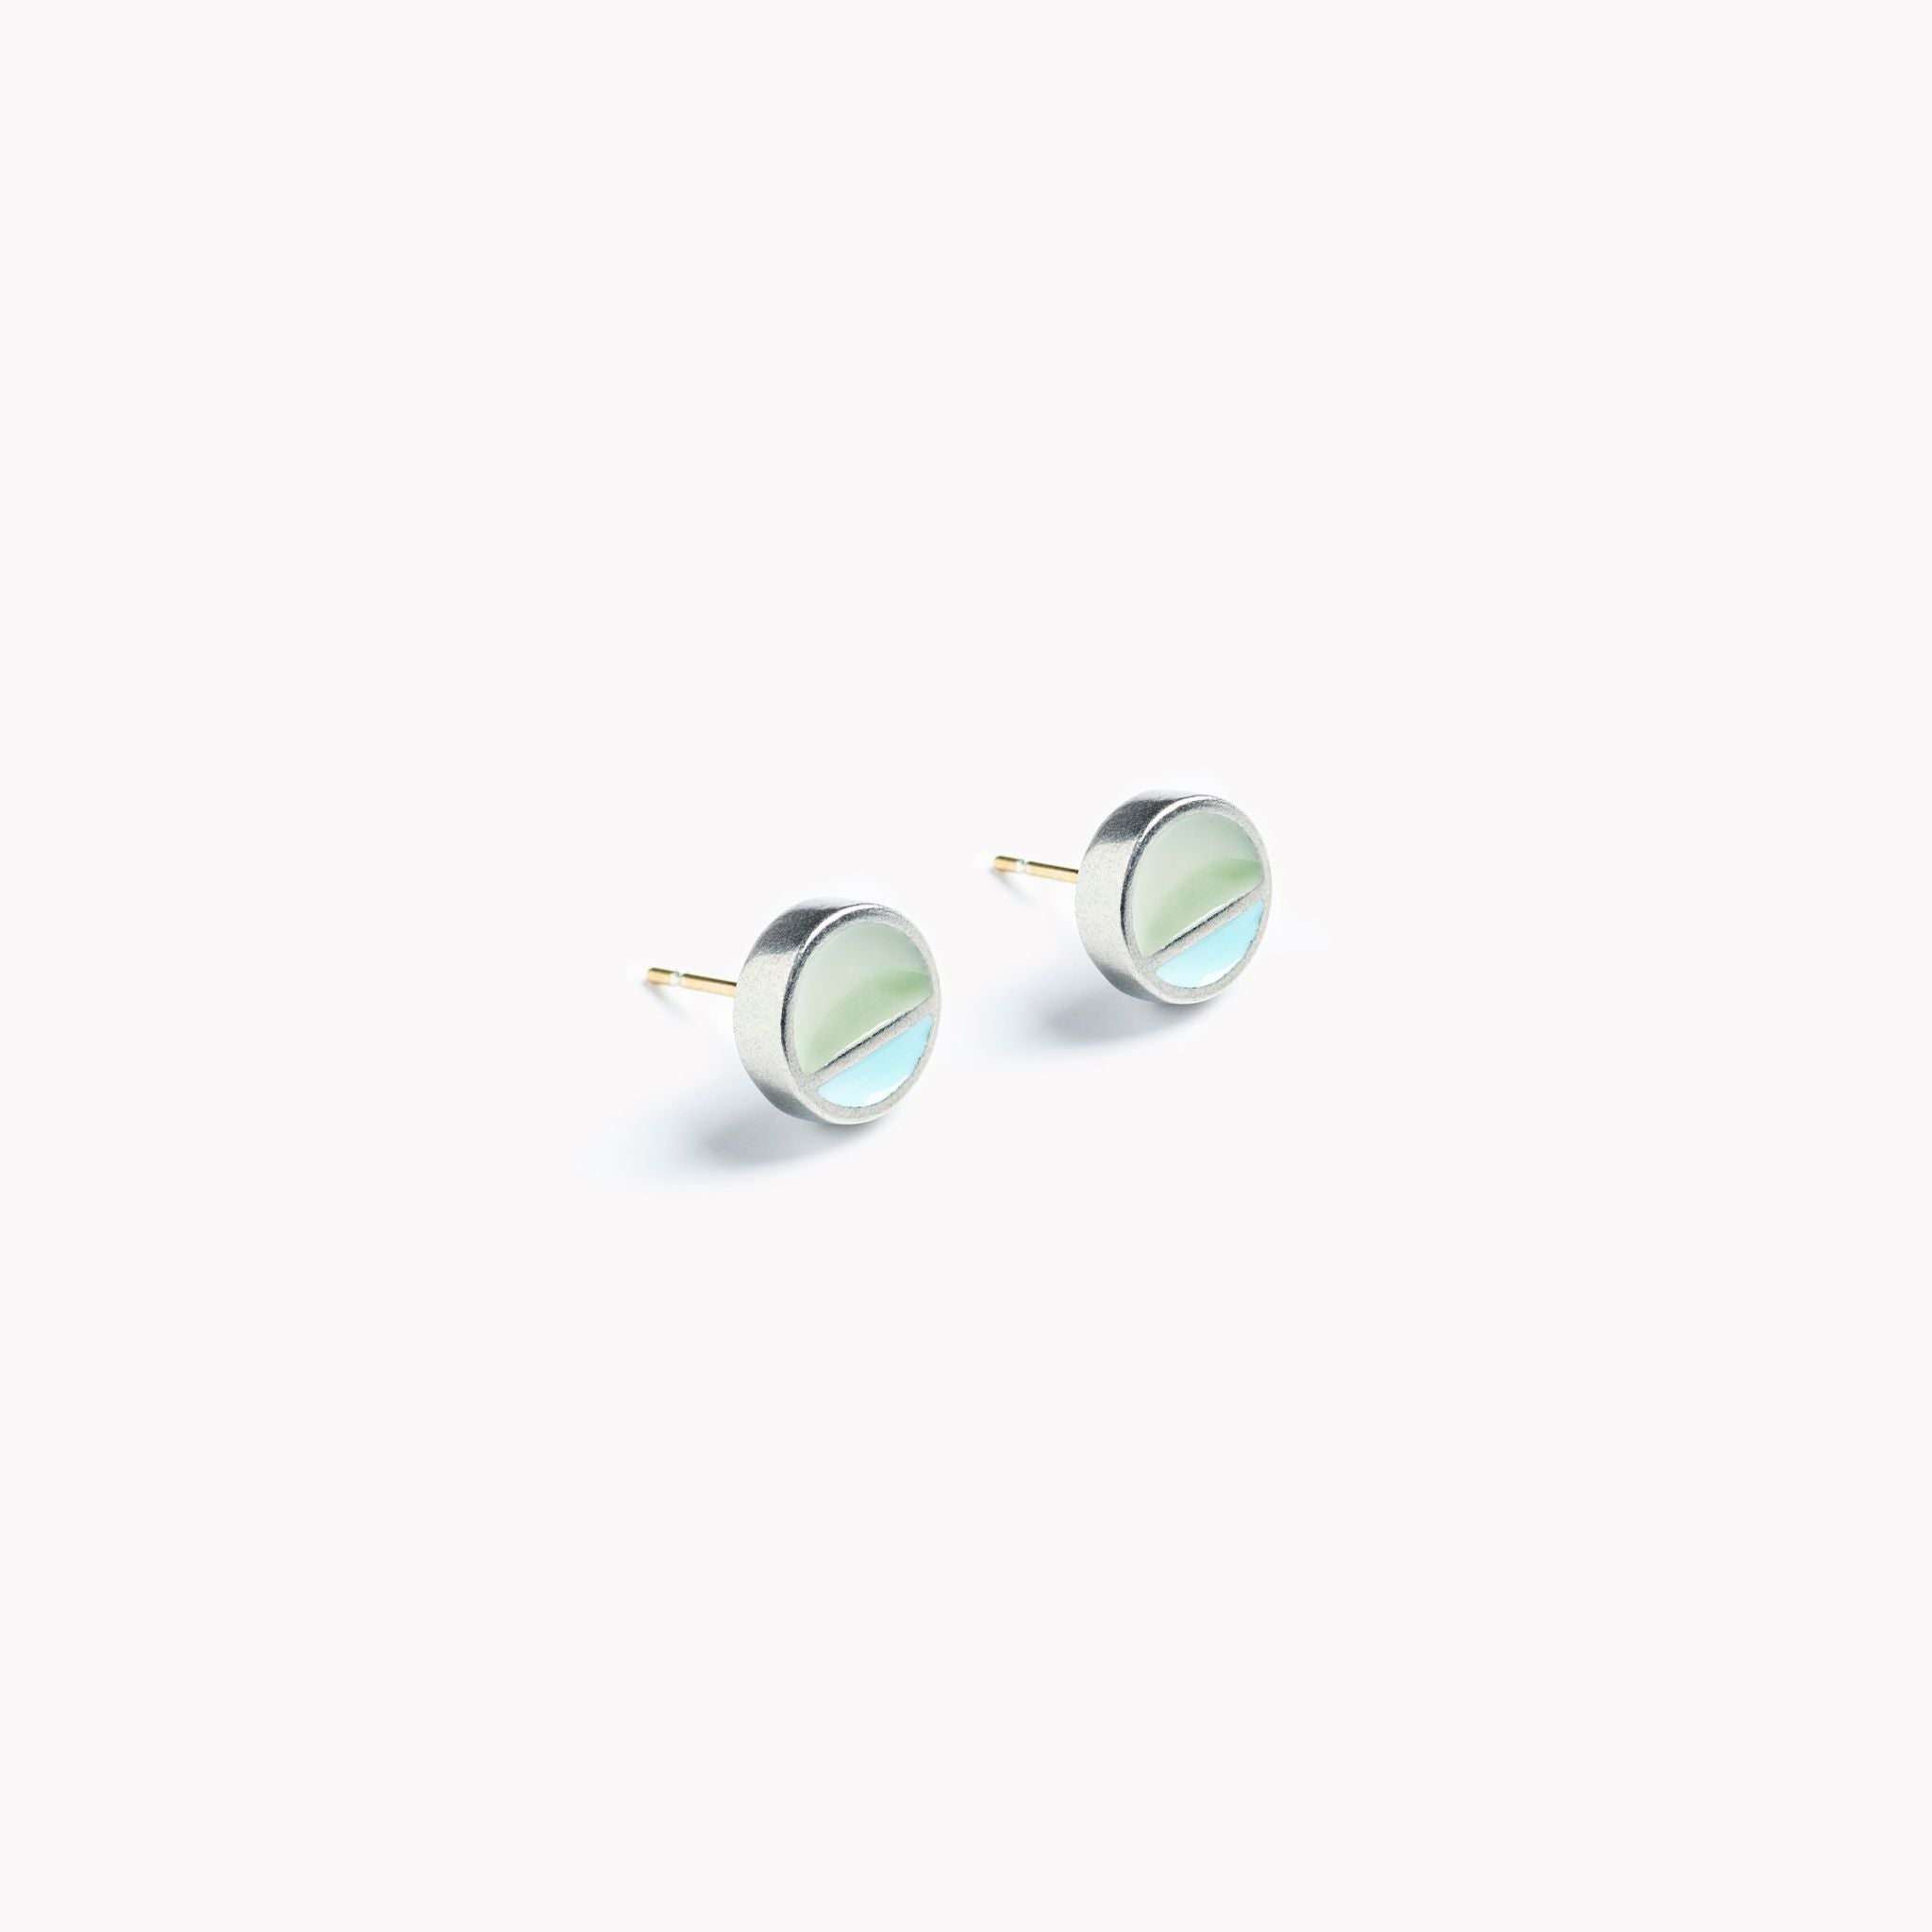 A simple pair of circular stud earrings with a horizontal division. In turquoise and grey.